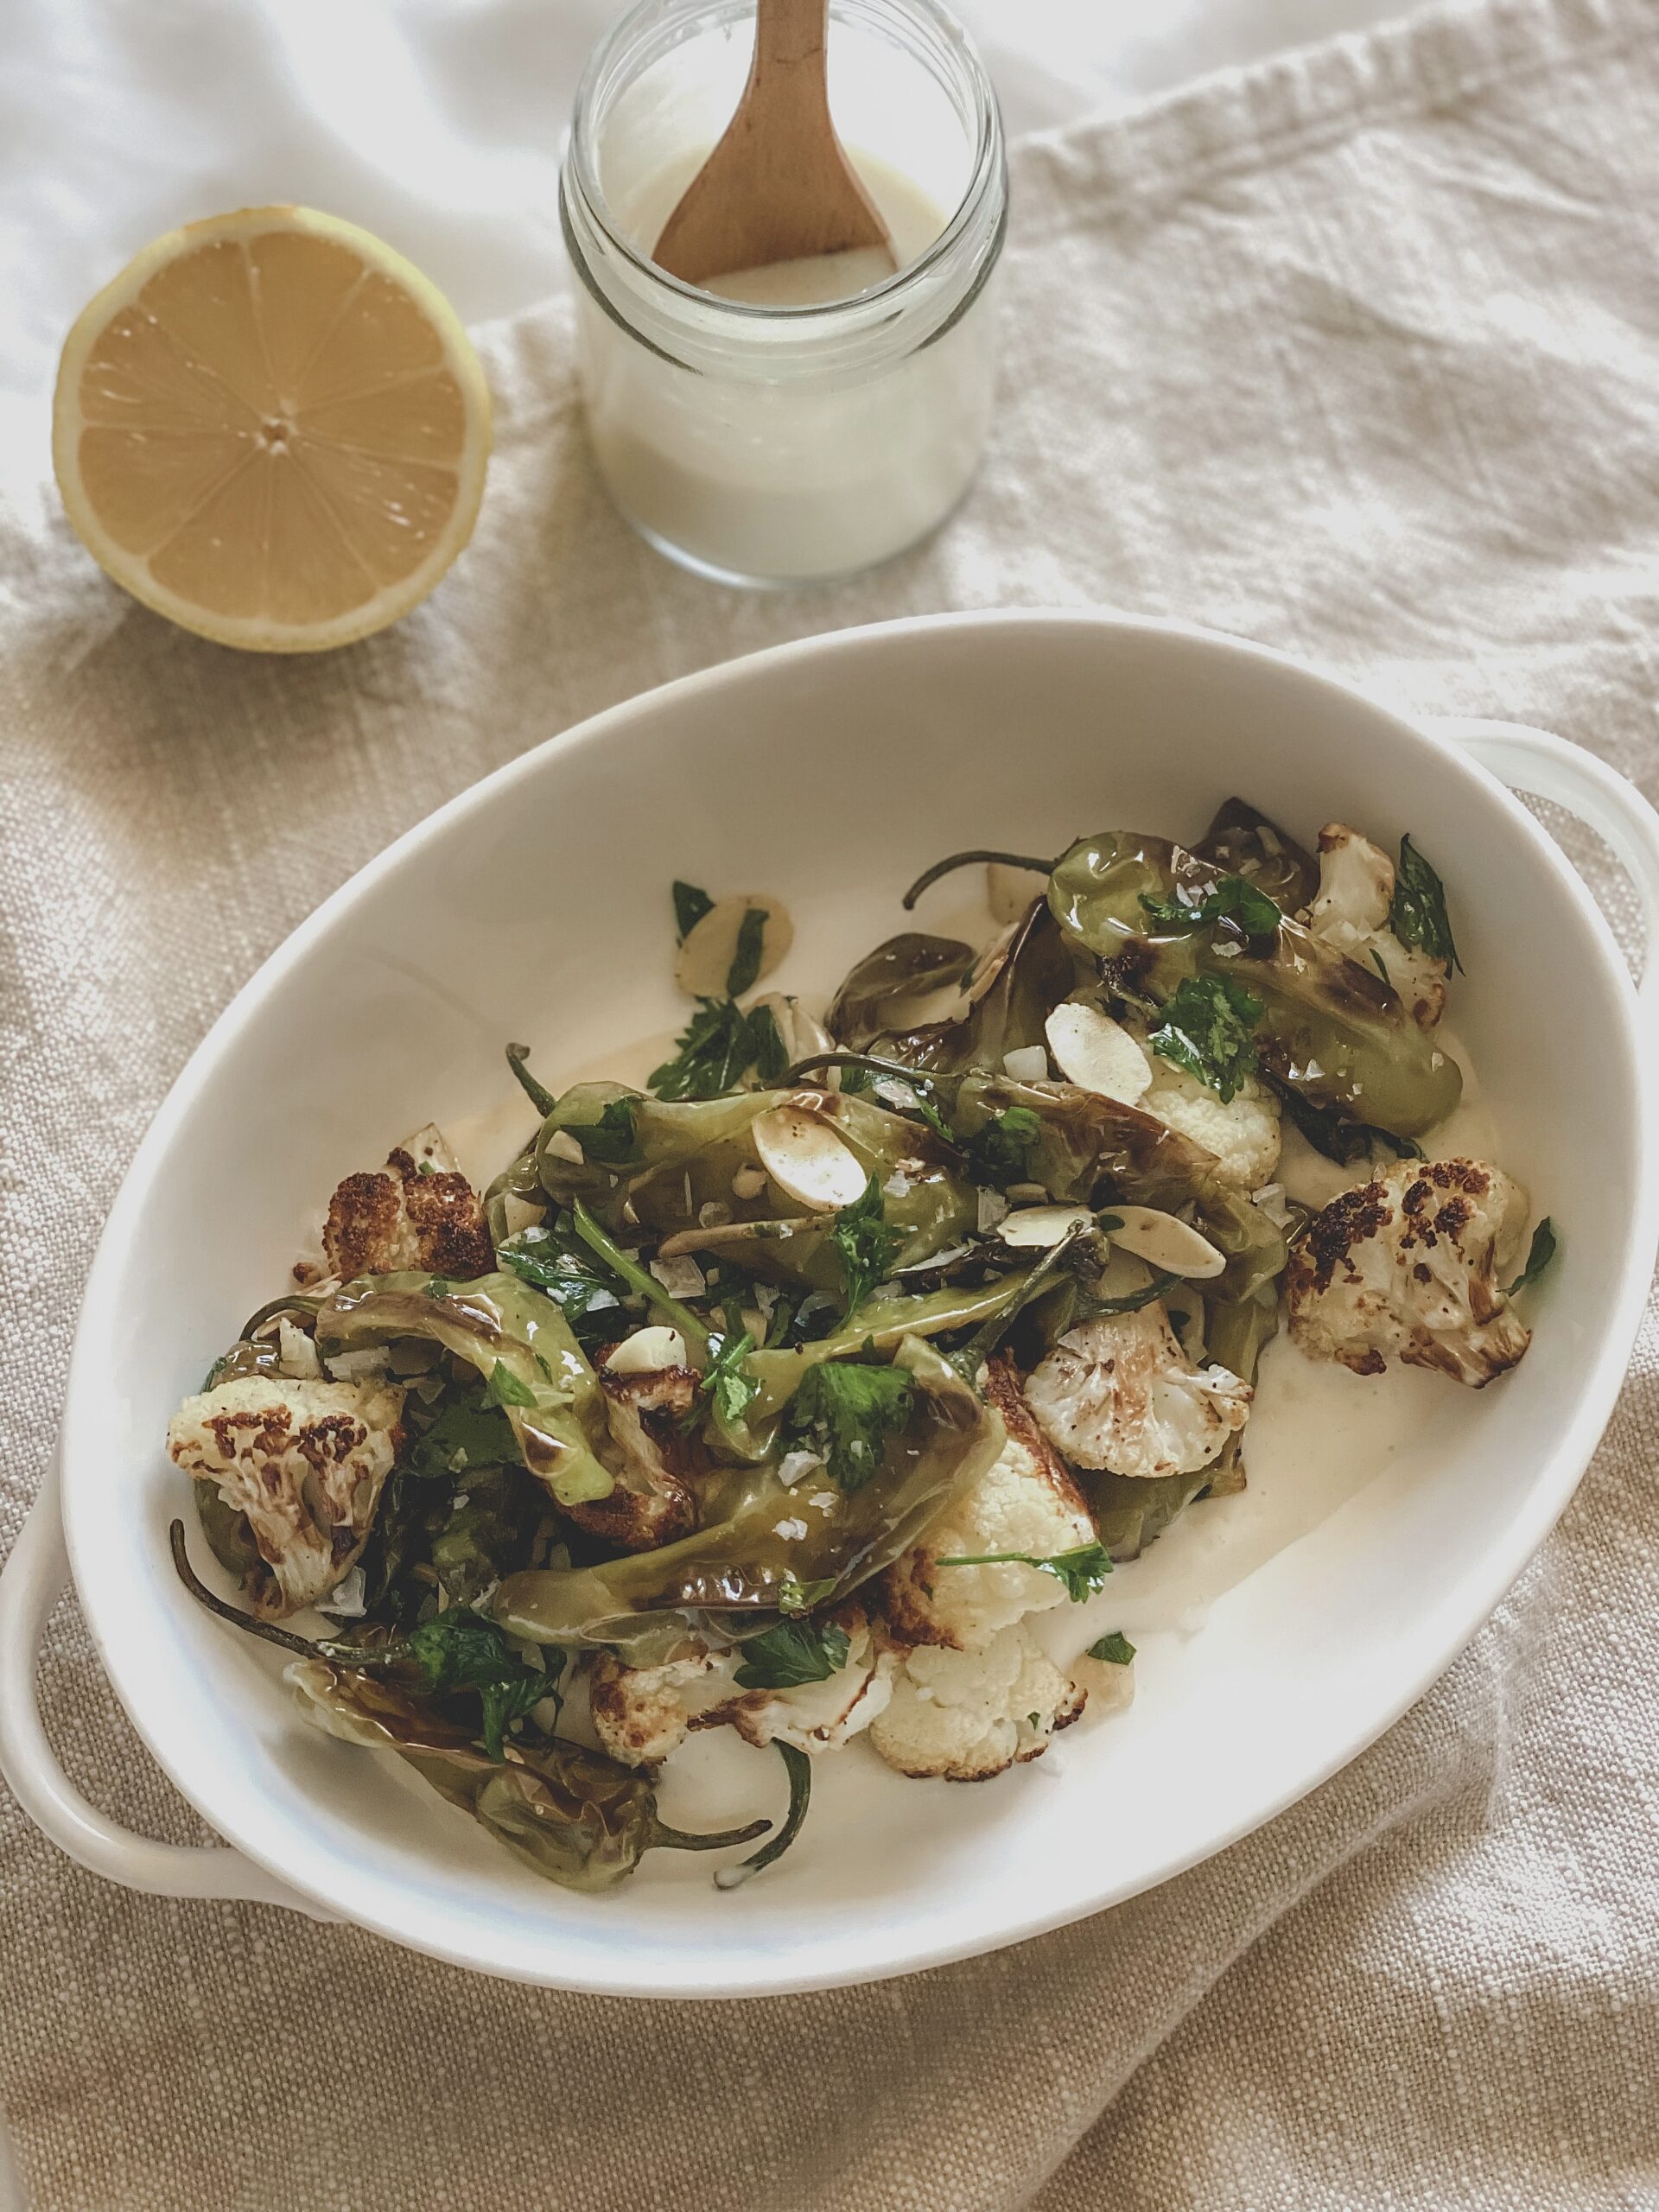 Roasted Cauliflower and Shishito Peppers with Creamy Garlic Sauce